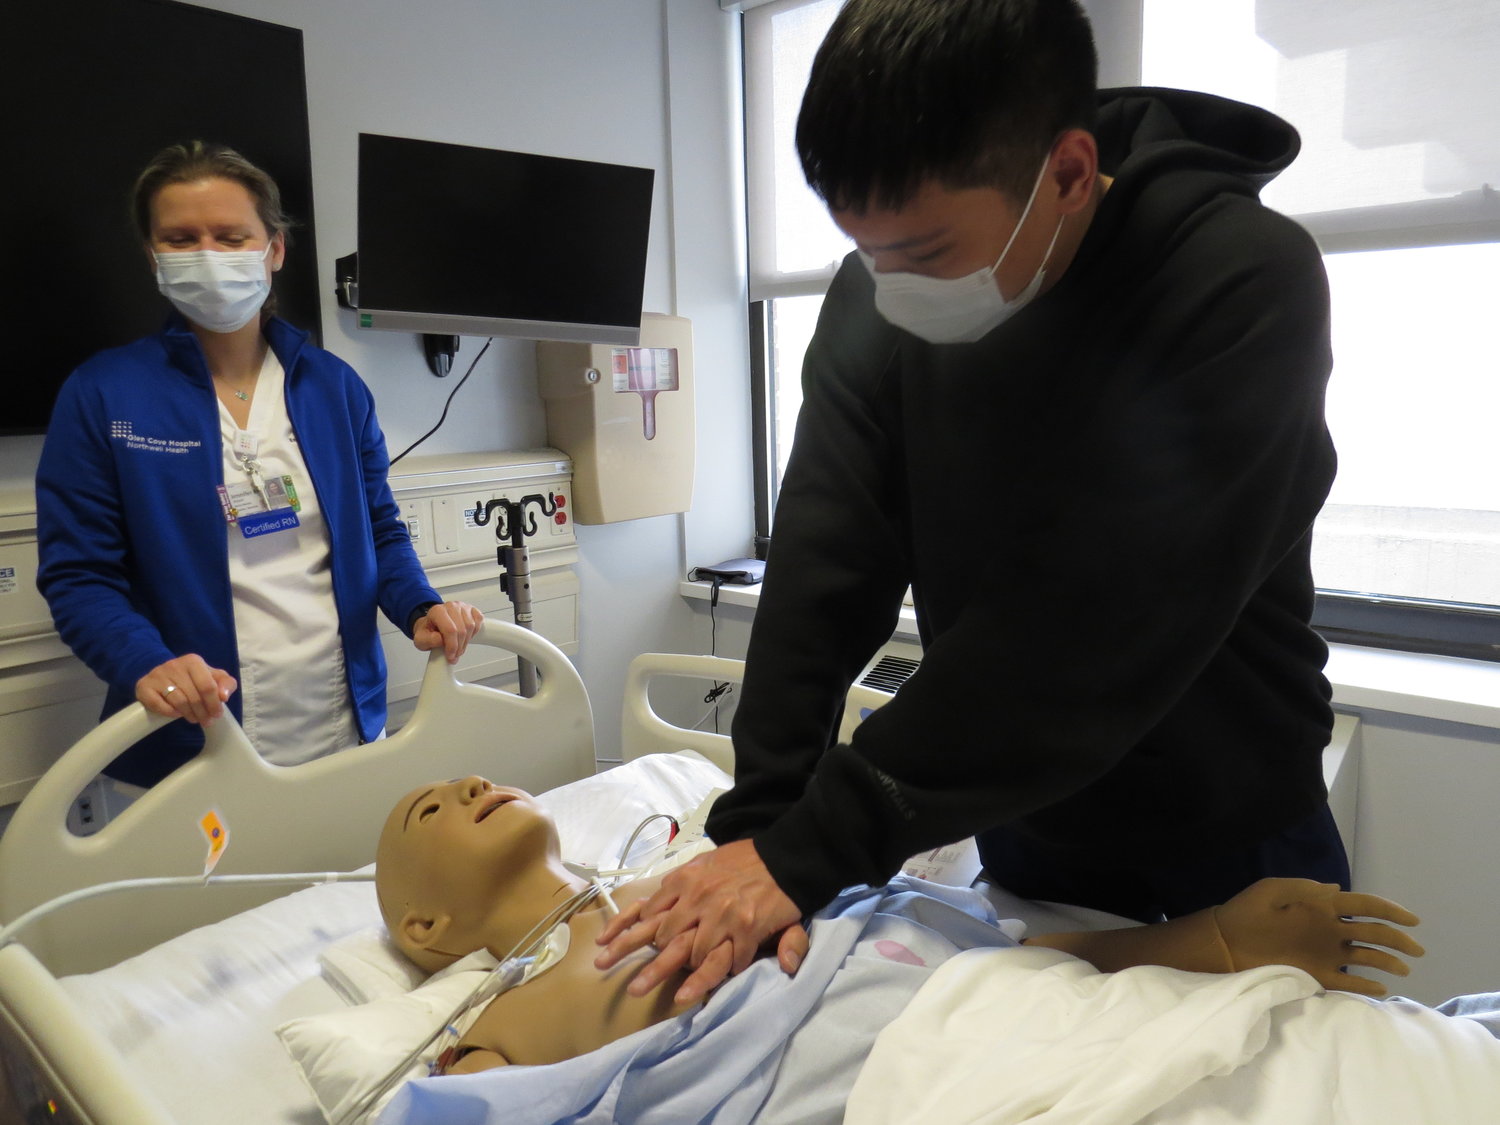 Matthew Mendoza, above, a registered nurse, practiced cardiopulmonary resuscitation on a lifelike but mostly plastic stand-in for a live patient. Jennifer Dixon, above left, a registered nurse and nurse educator, oversaw the training.